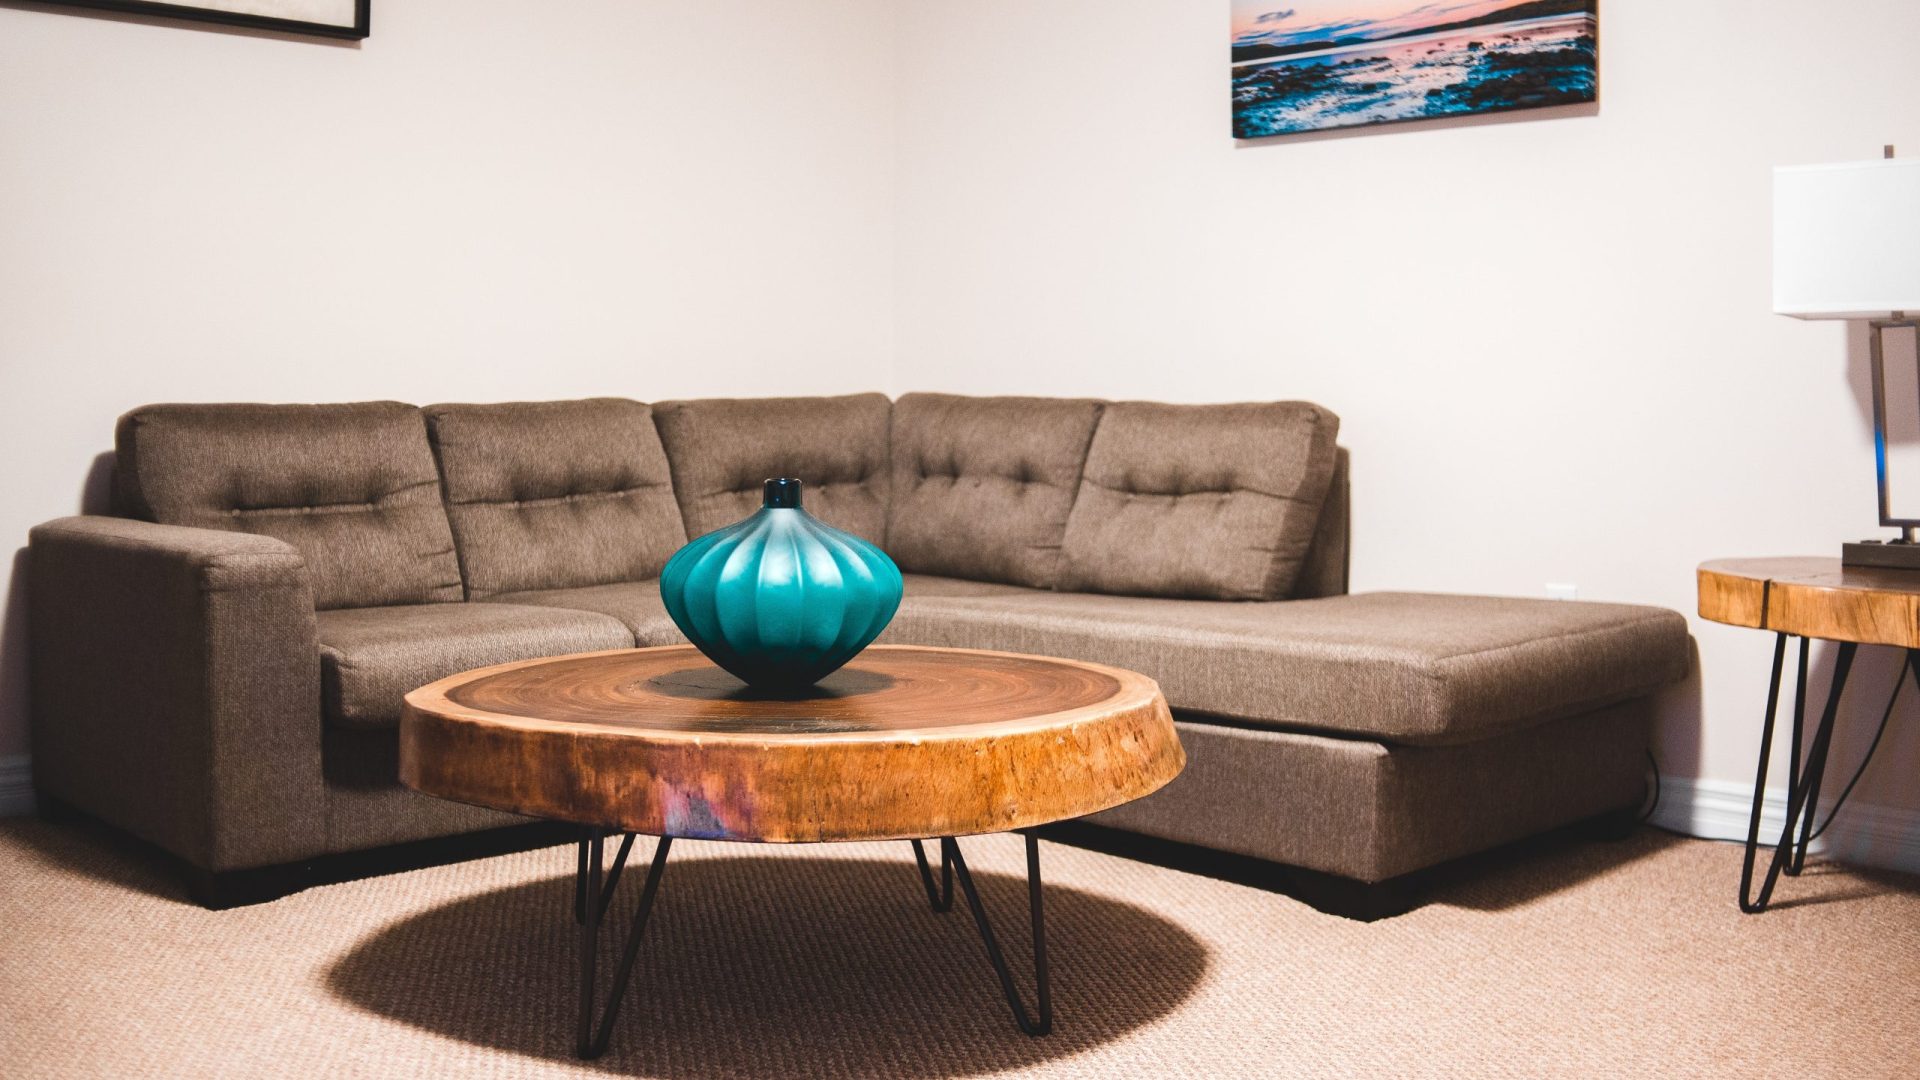 Modern Coffee Table with Blue Vase